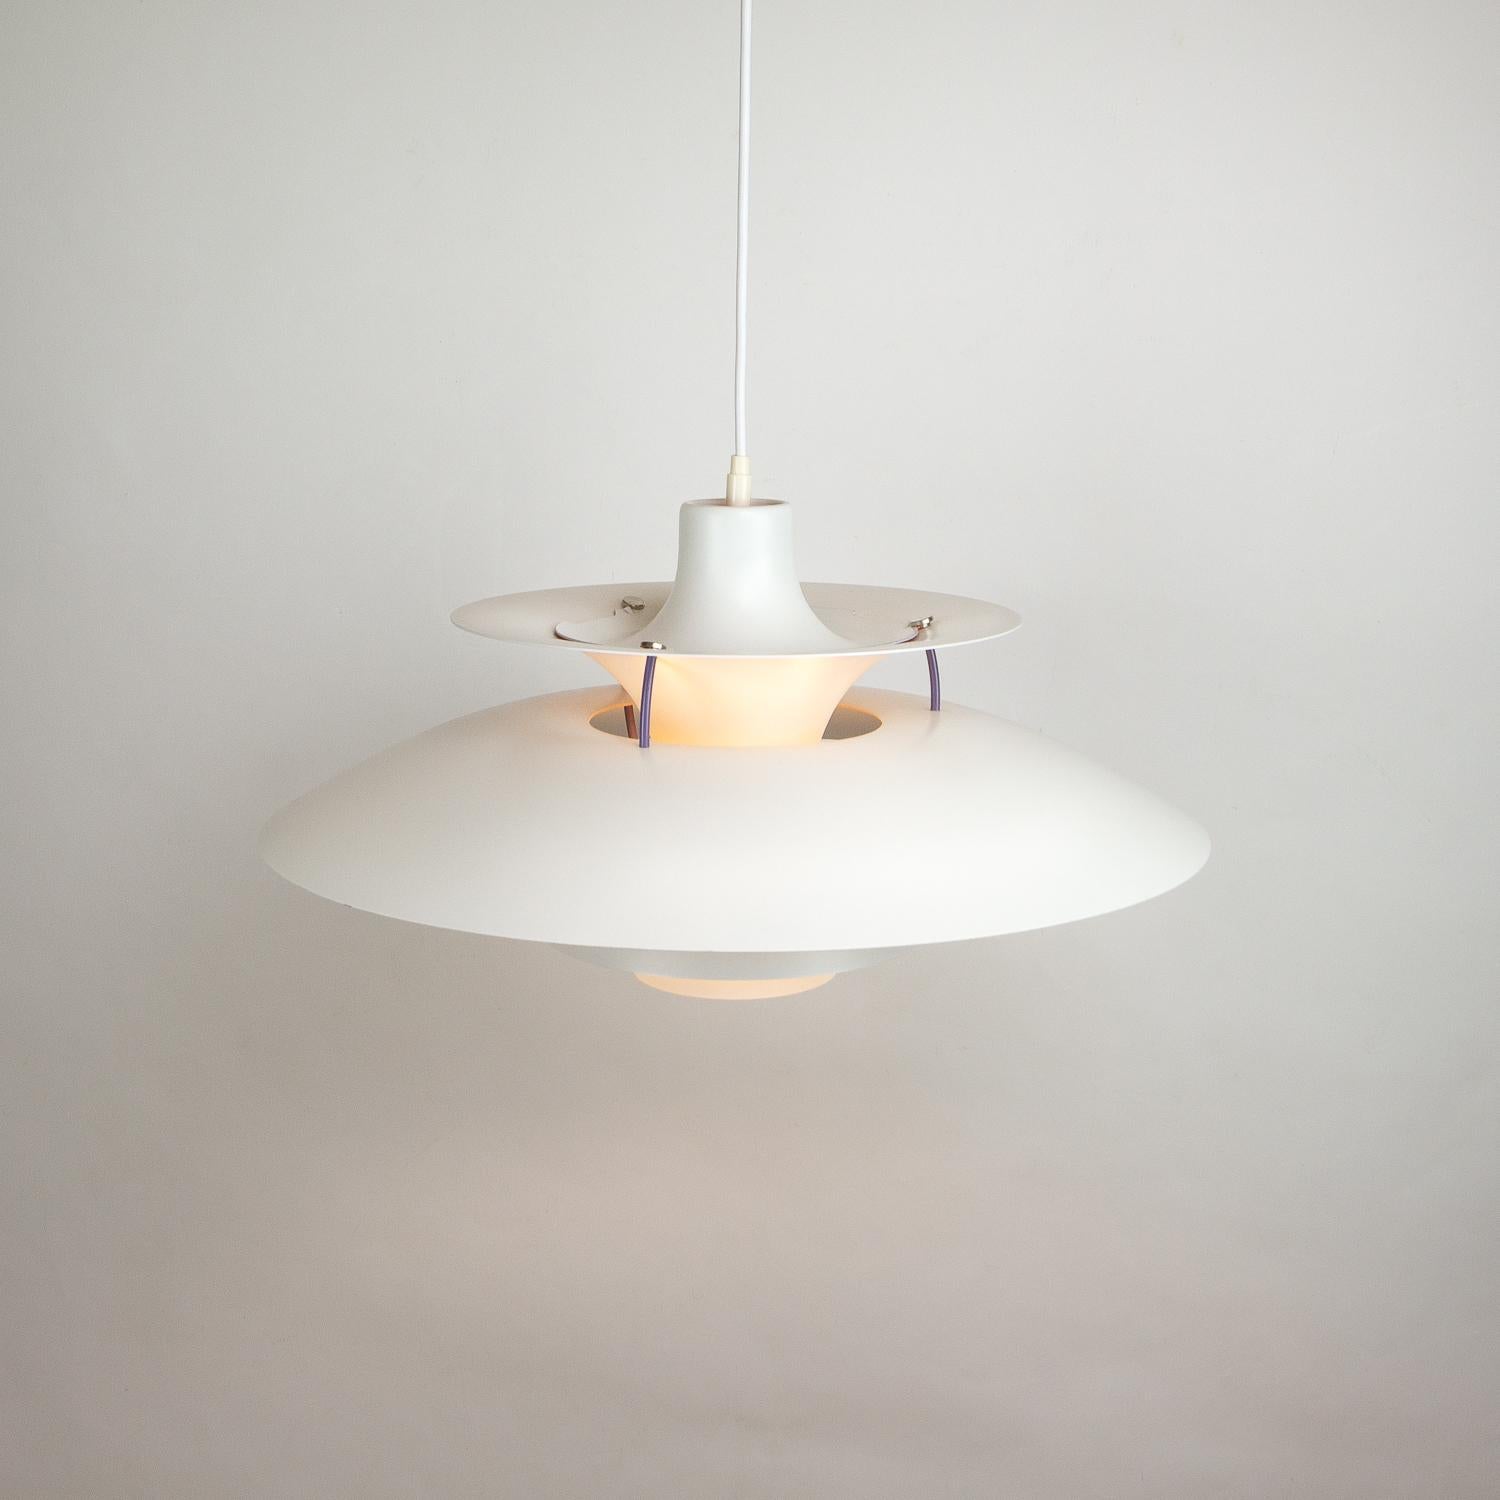 Designed by Poul Henningsen for Louis Poulsen in 1958. The PH5 is designed to be hung low over a table and disperses the light in a non-glare manner. Excellent vintage condition, Denmark, 1960s-1970s. We have 2 available in white.